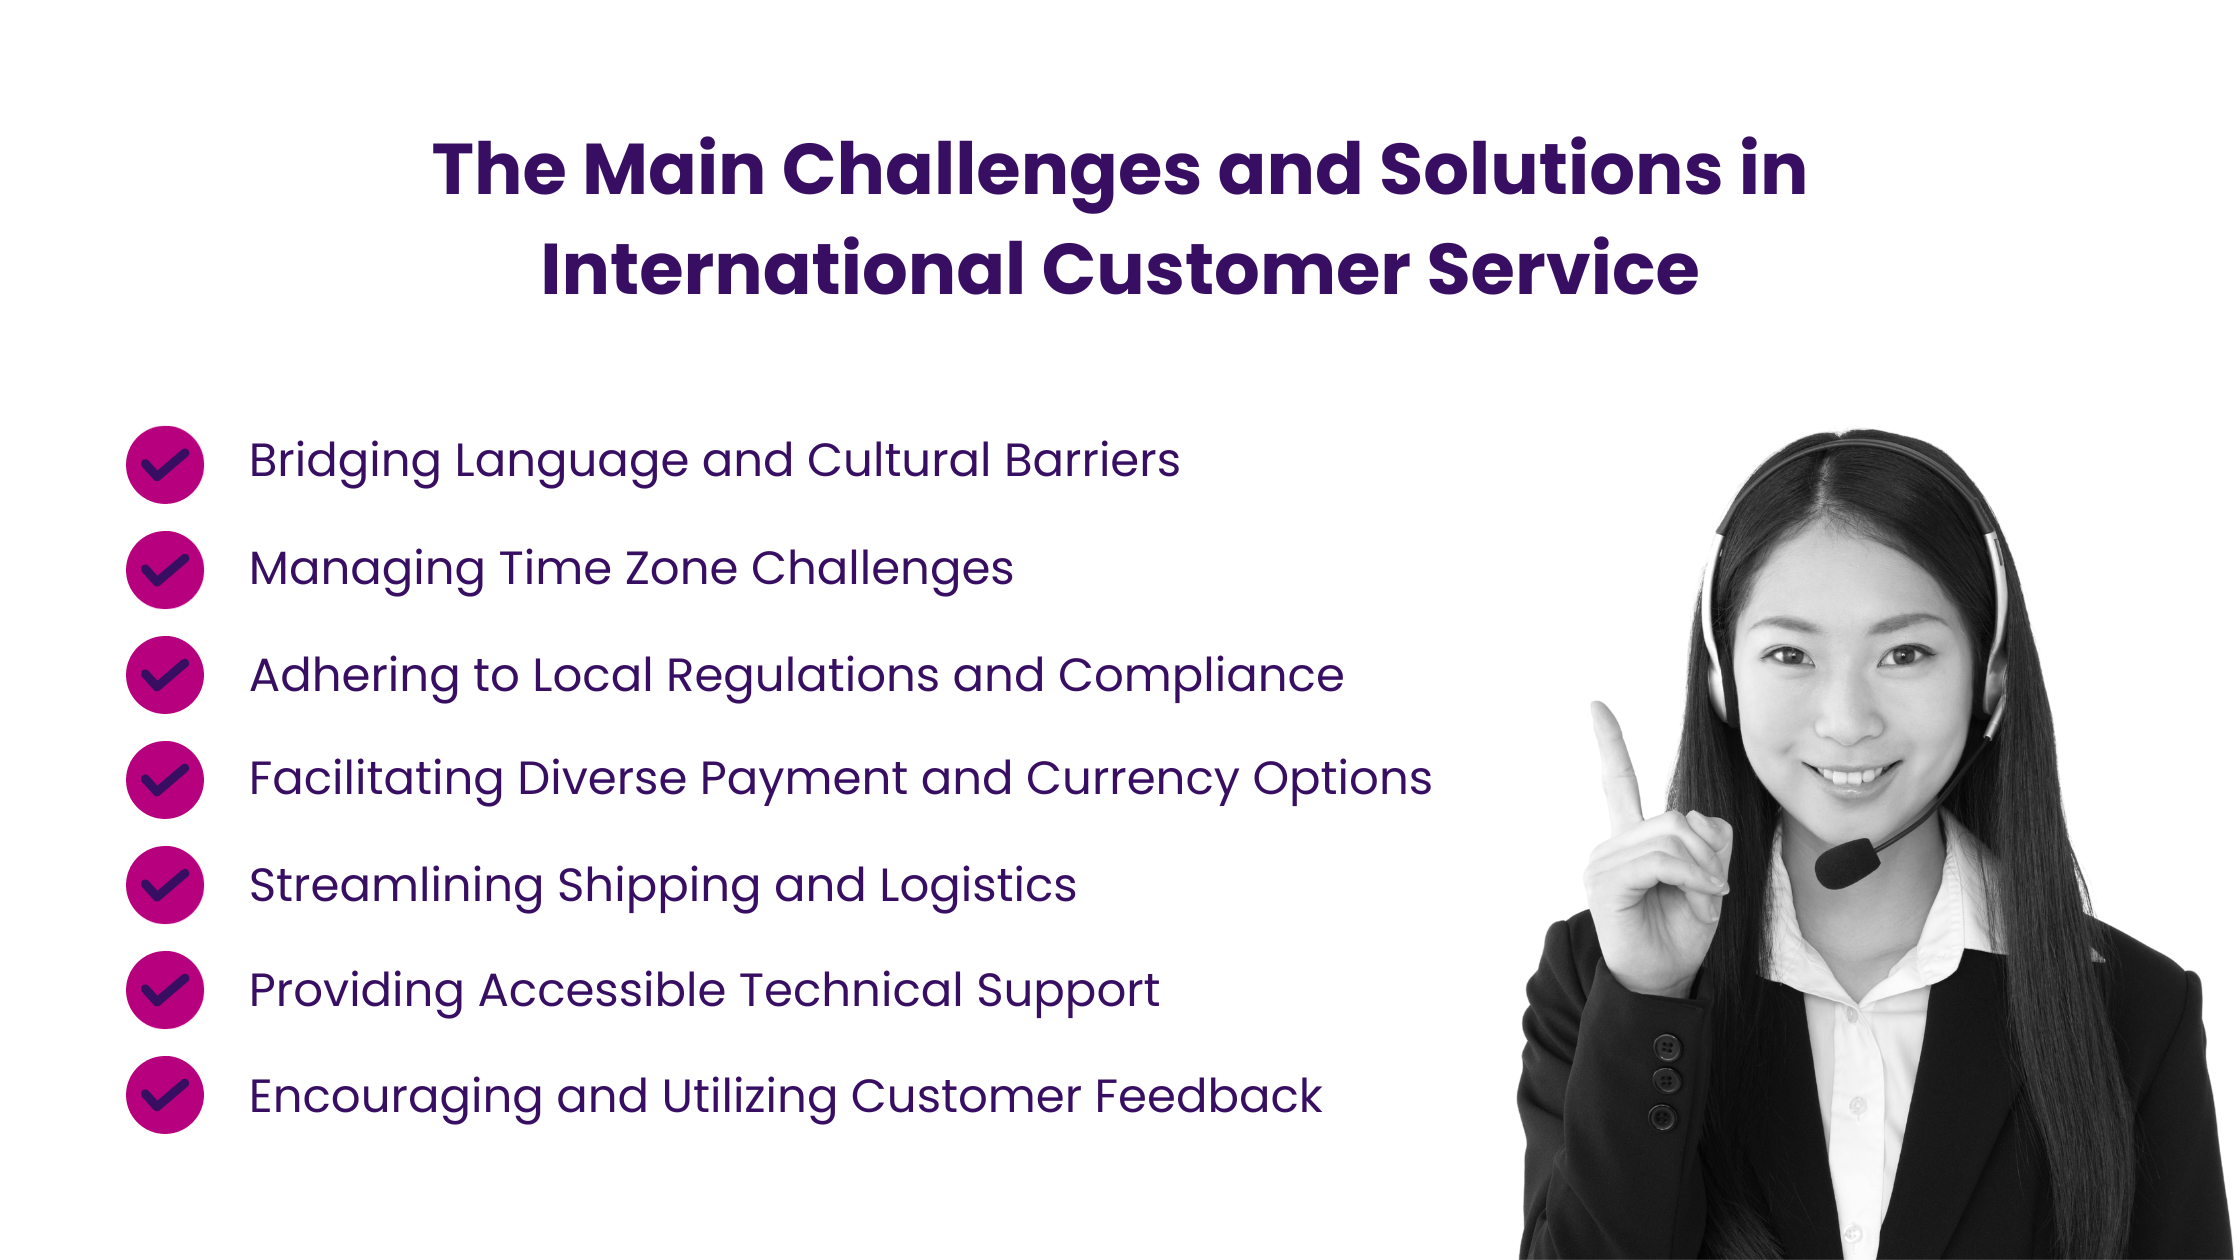 The Main Challenges and Solutions in International Customer Service